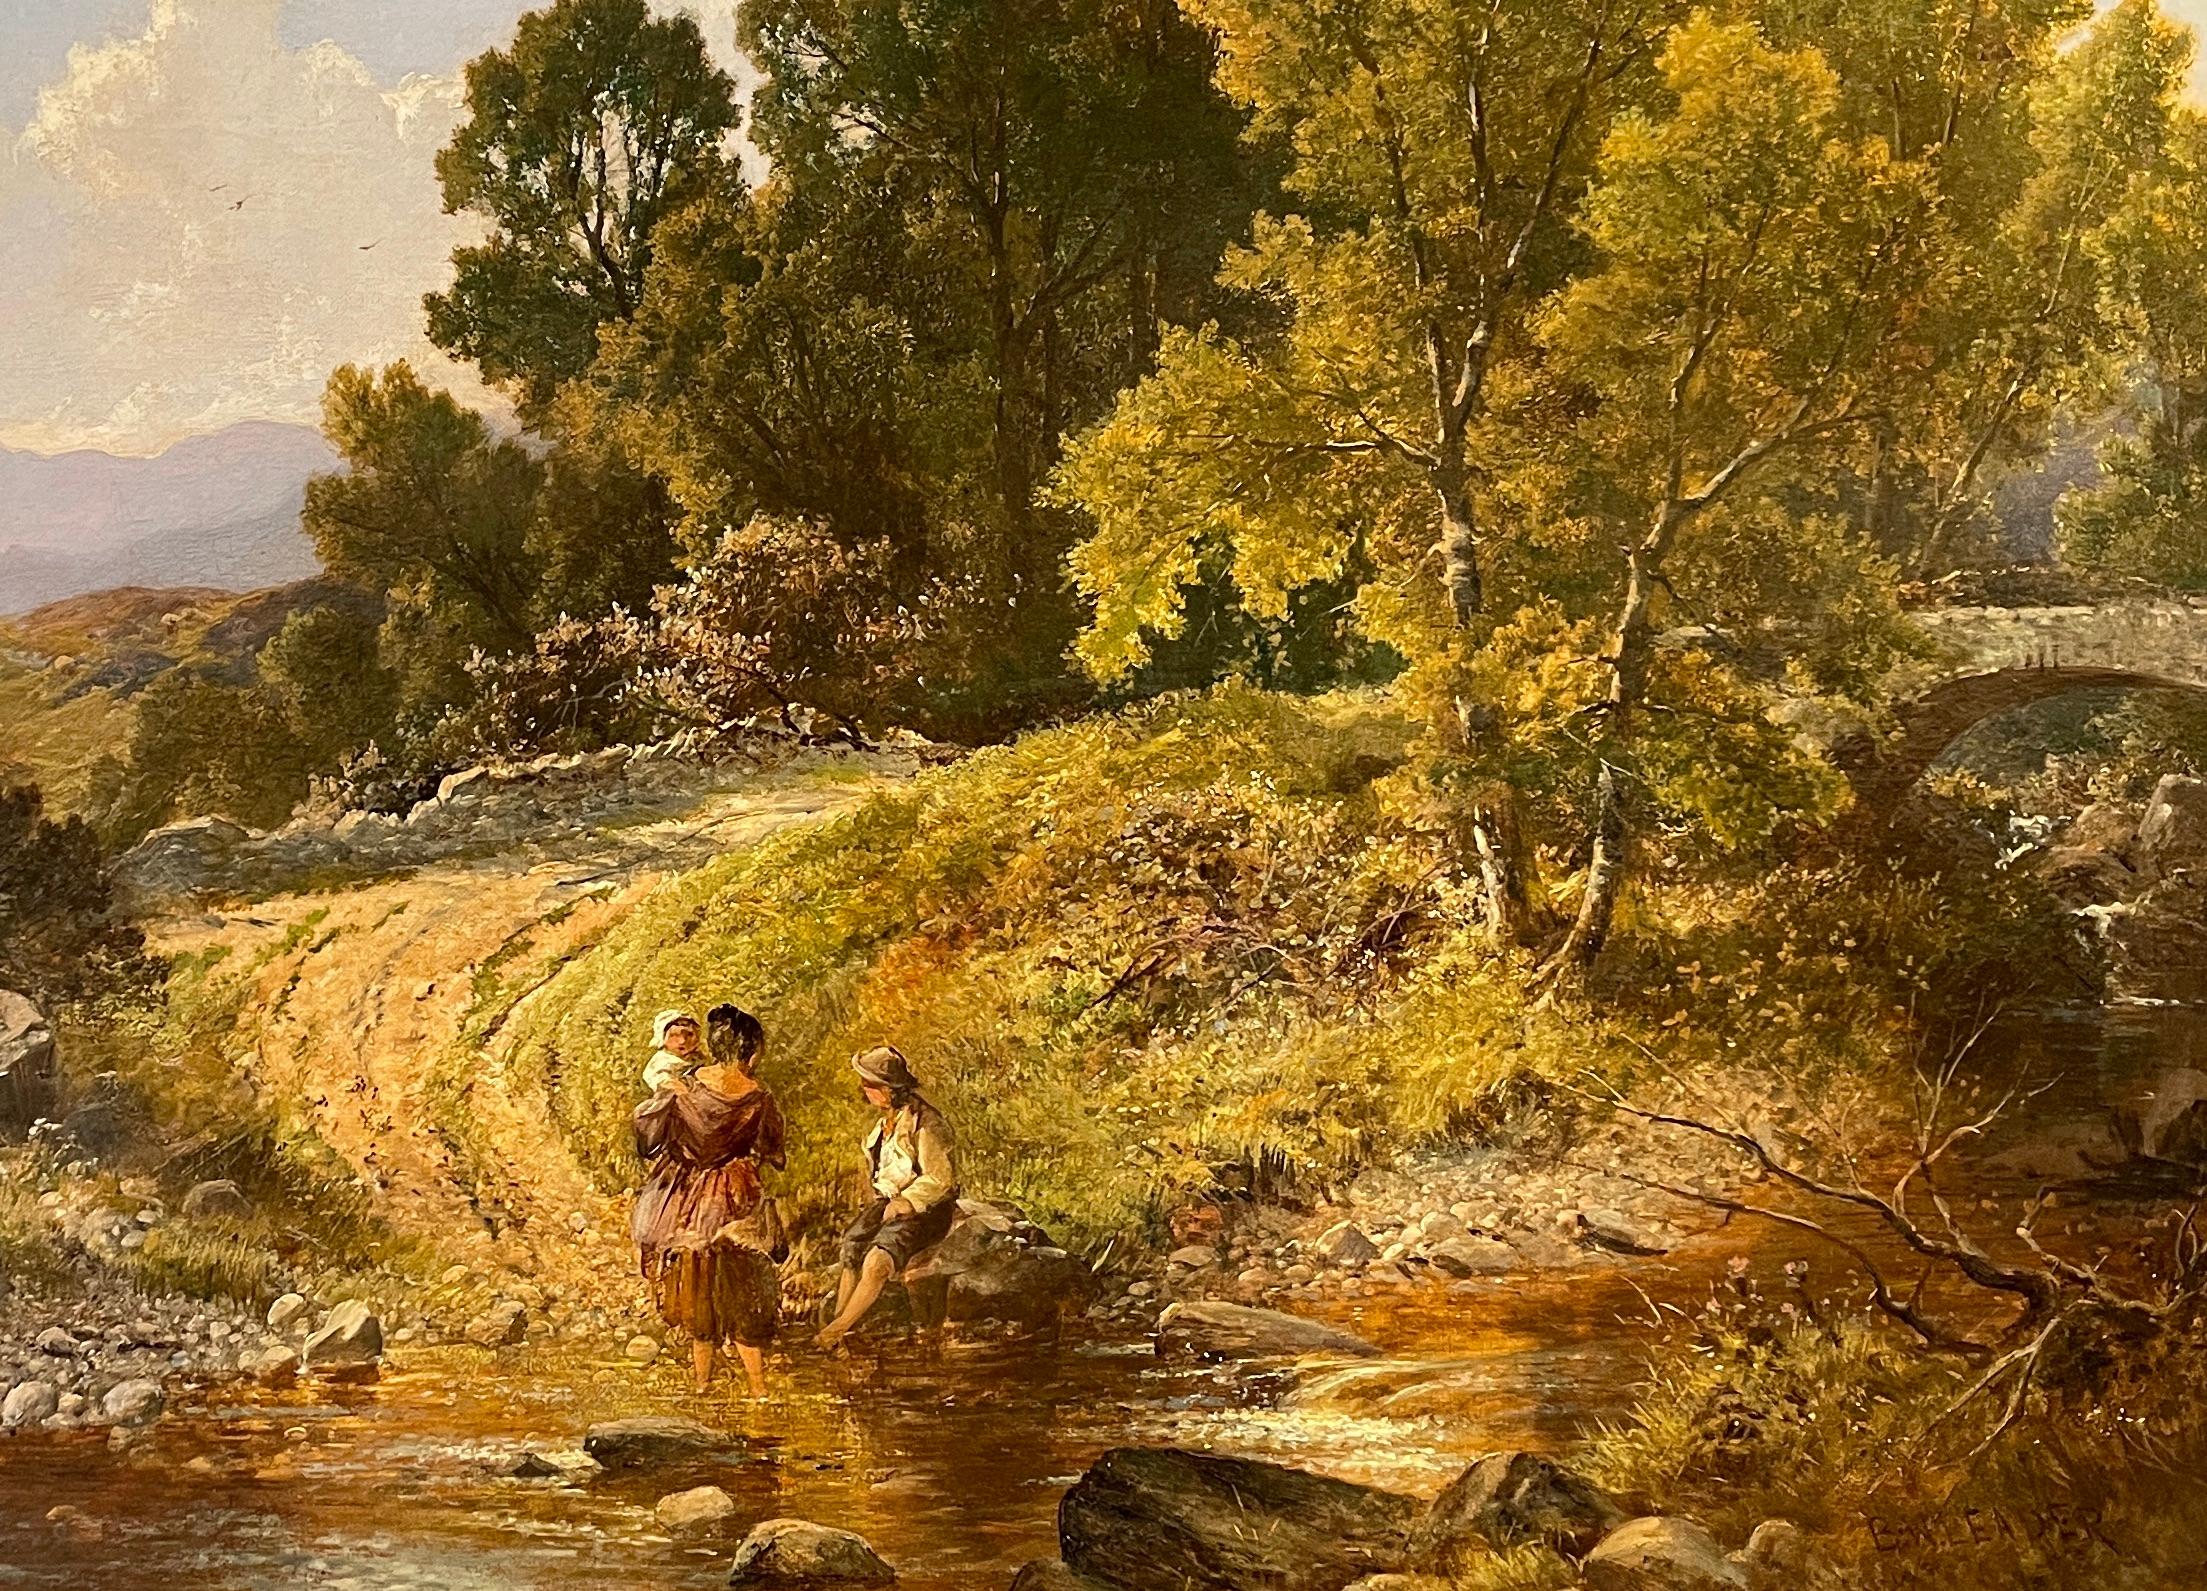 'Wading in the River' 19th century landscape painting of figures, greenery For Sale 2